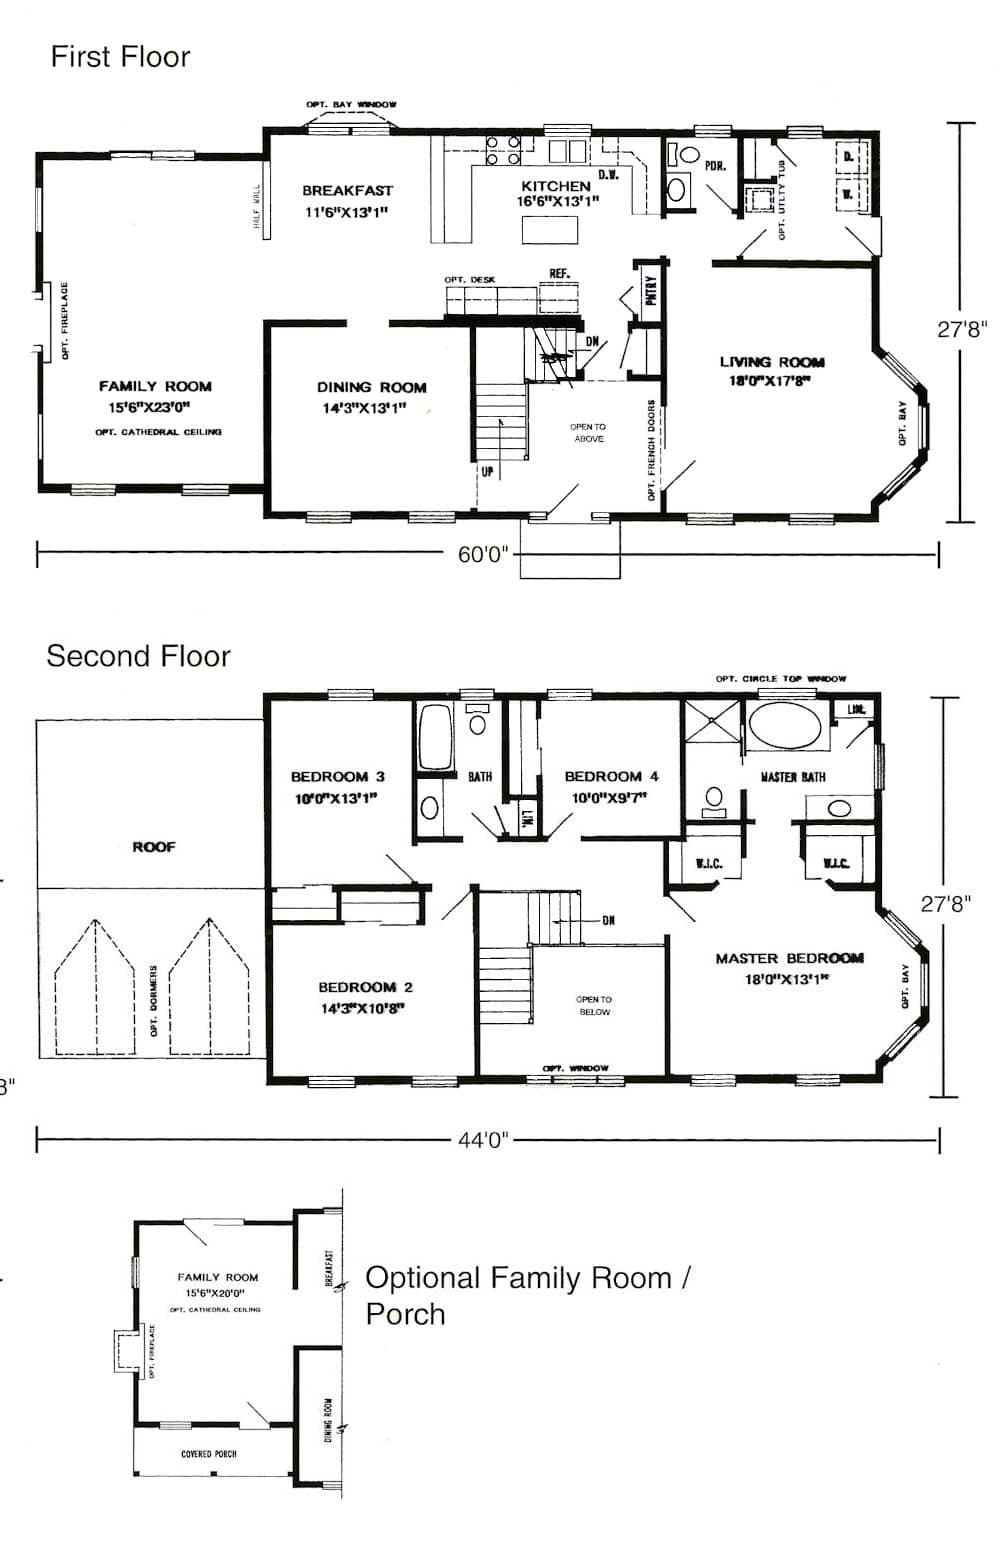 The Cornell Two Story Colonial Home Floor Plan